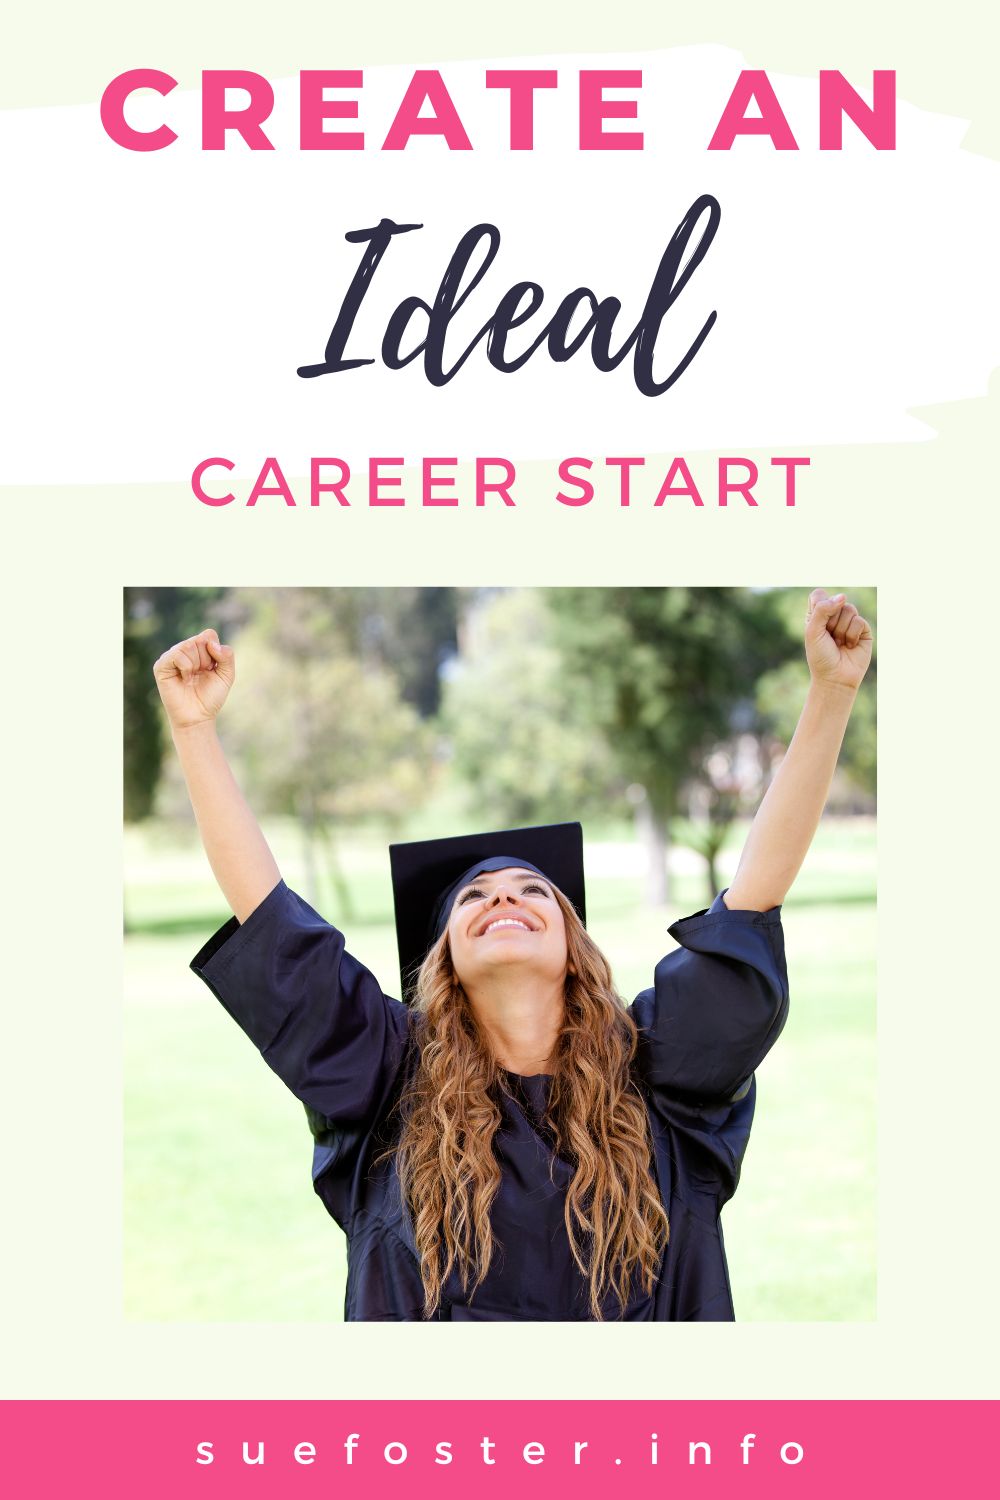 Working your entire academic life can be disappointing if you get greeted with a menial entry-level job. Here are a few tips to make yourself more decorated.